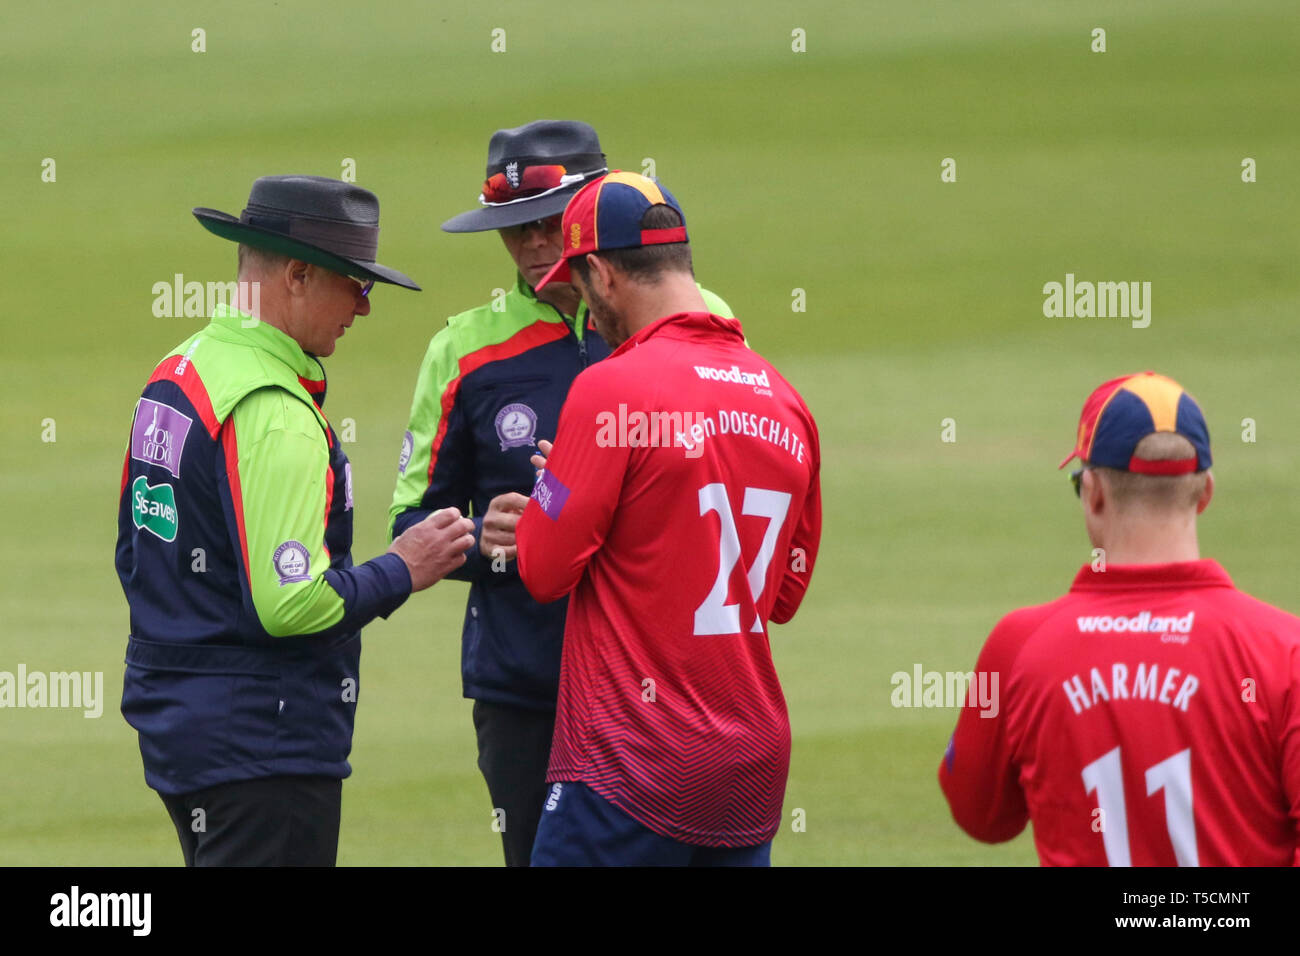 London, UK. 23 April 2019: Umpires Ben Debenham and Mike Burns discuss the condition of the match ball wth captain Ryan ten Doeschate of Essex during the Surrey v Essex, Royal London One Day Cup match at The Kia Oval. Credit: Mitchell Gunn/ESPA-Images/Alamy Live News Stock Photo